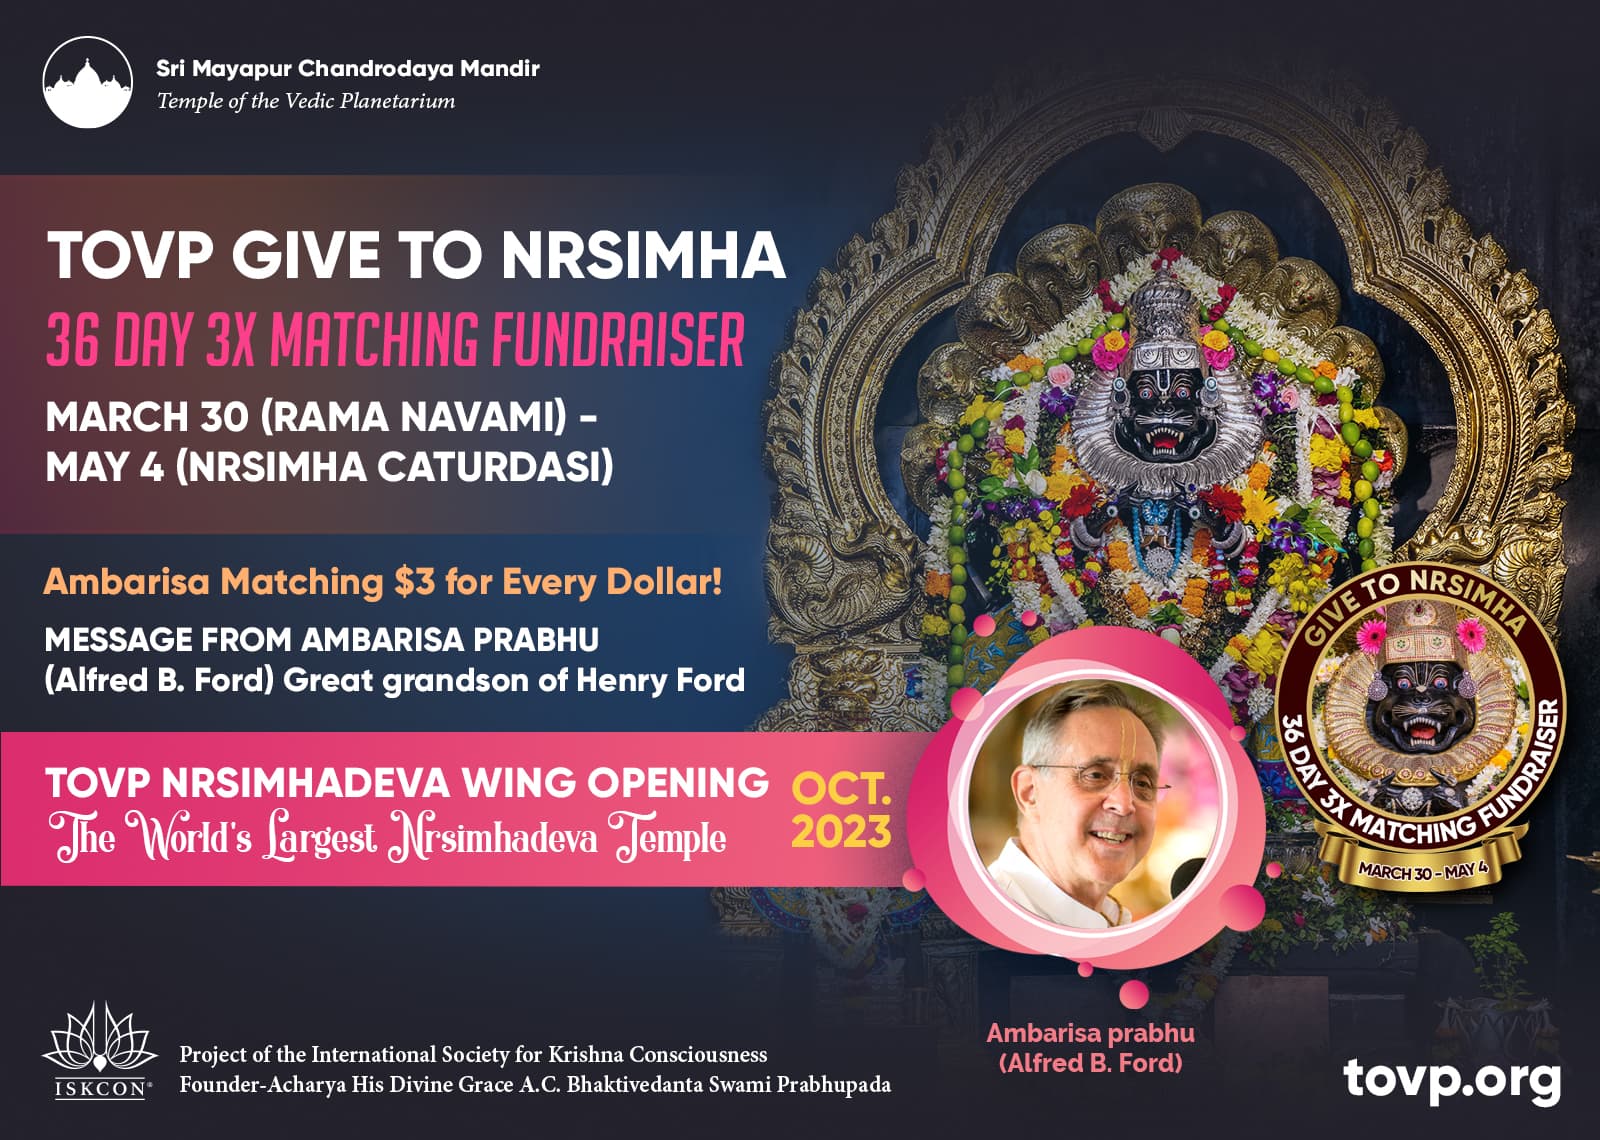 TOVP Give To Nrsimha 36 Day 3X Matching Fundraiser